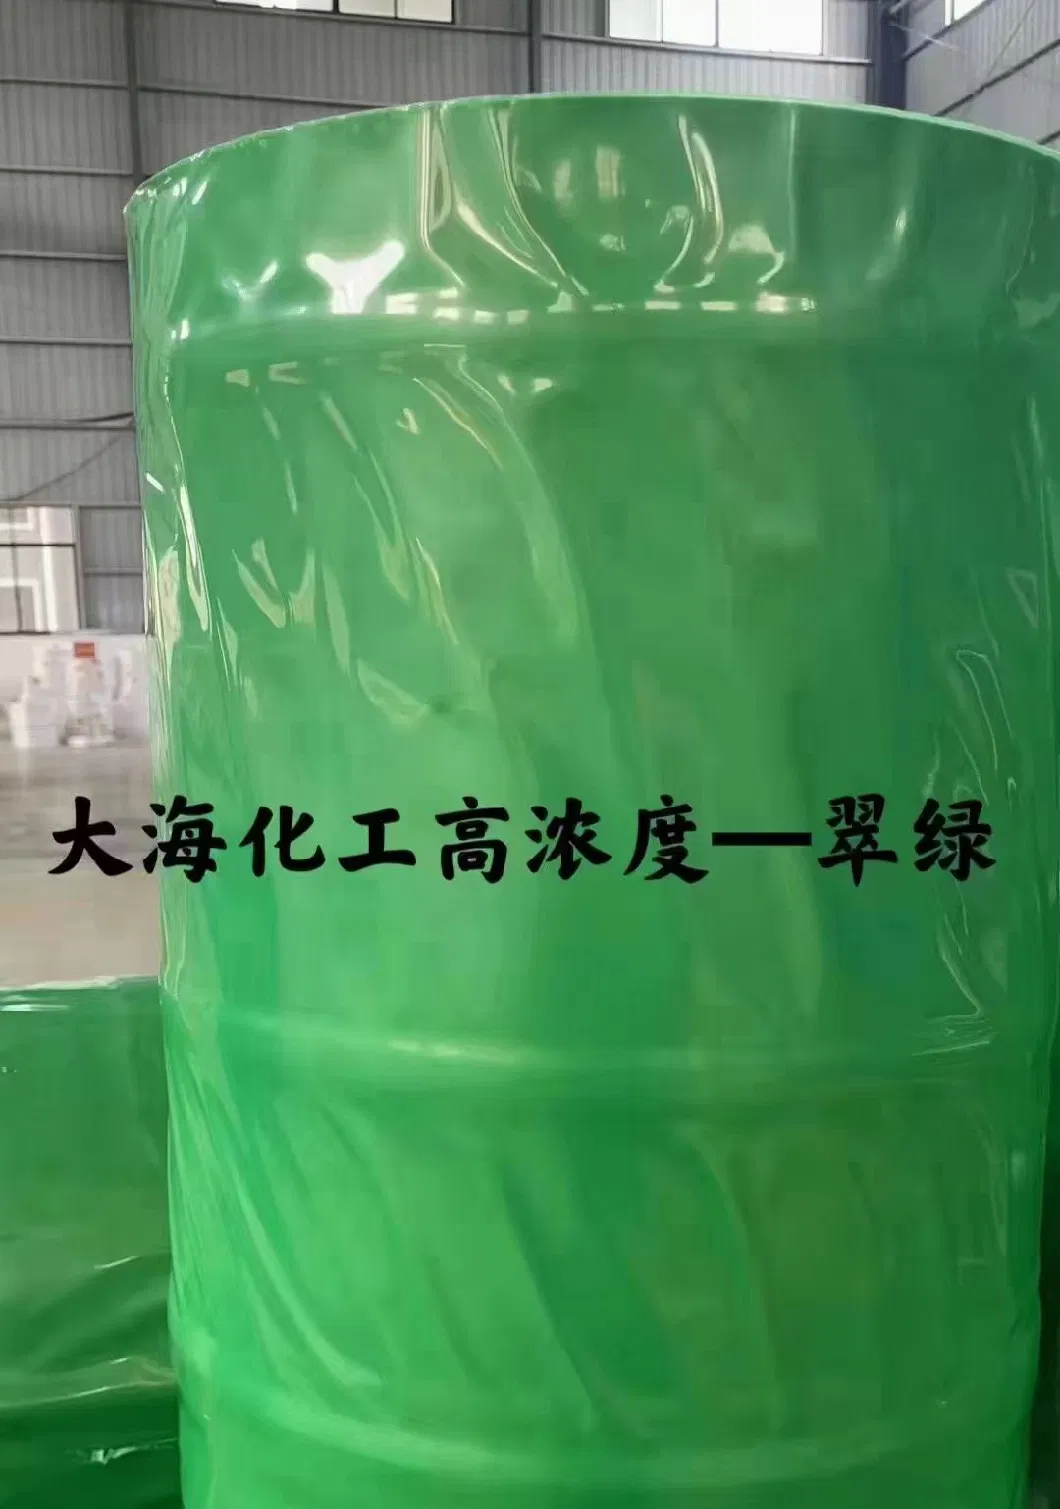 High Concentration Pipes/Household Appliances/Toys/Textiles/Film Sapphire Blue Masterbatch Plastic Resin Particles